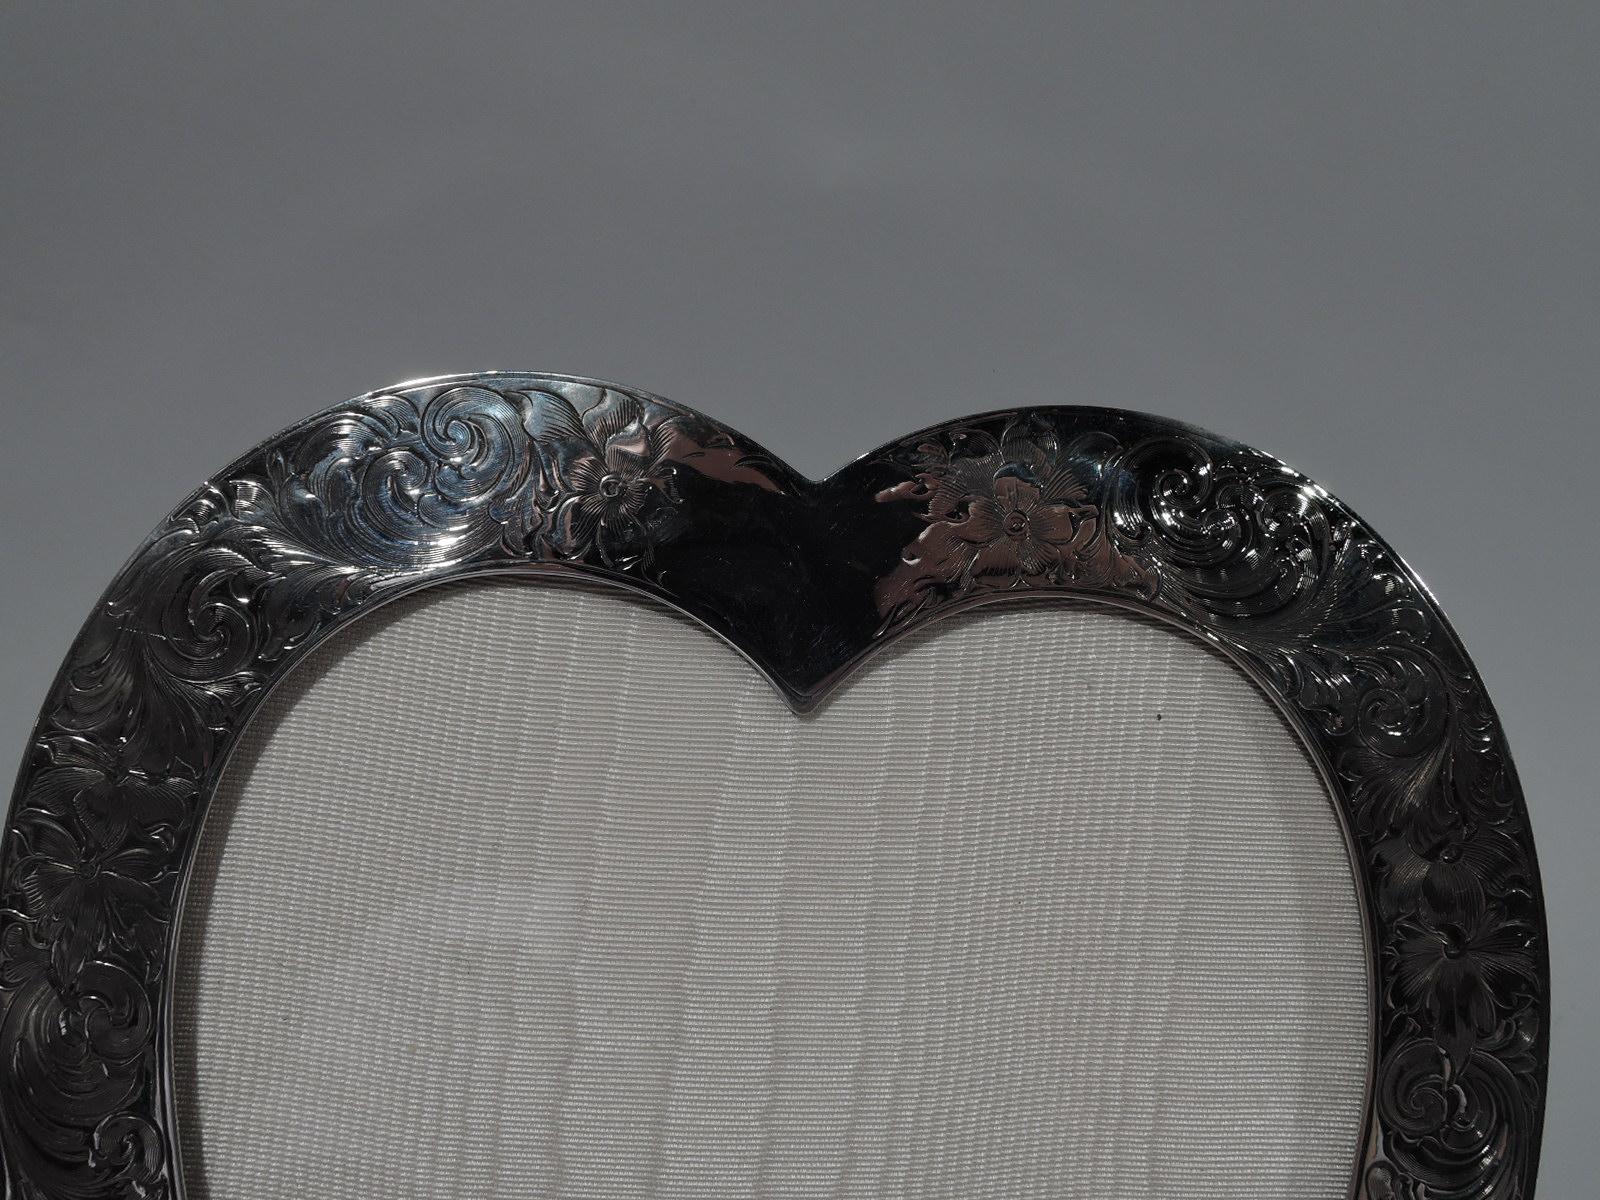 American Antique Gorham Sterling Silver Valentine’s Day Heart Picture Frame